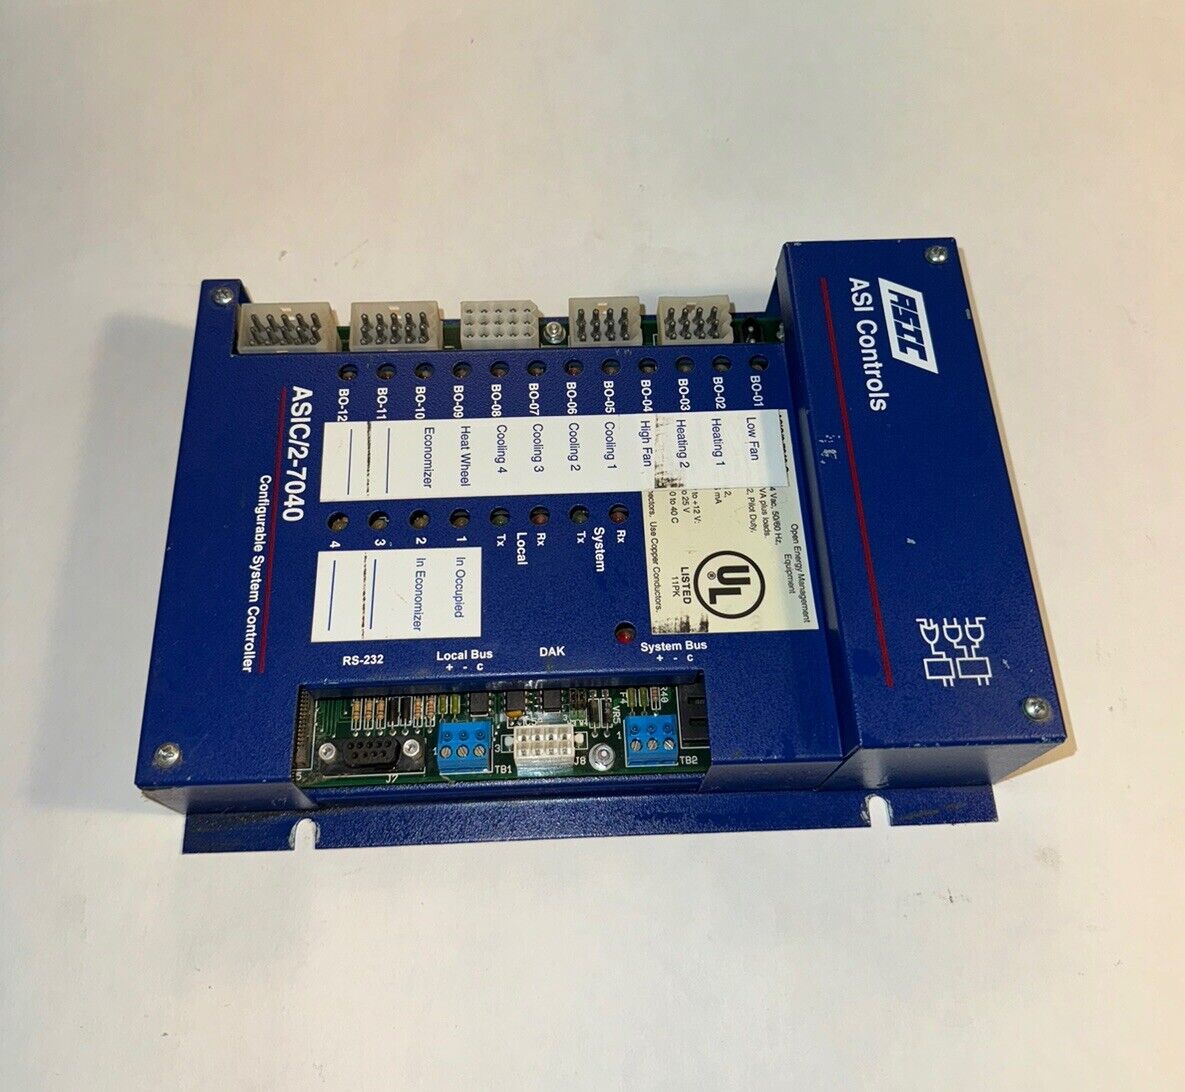 ASI ELECTRONICS ASIC/2-7040 / ASIC27040 Control System , Tested